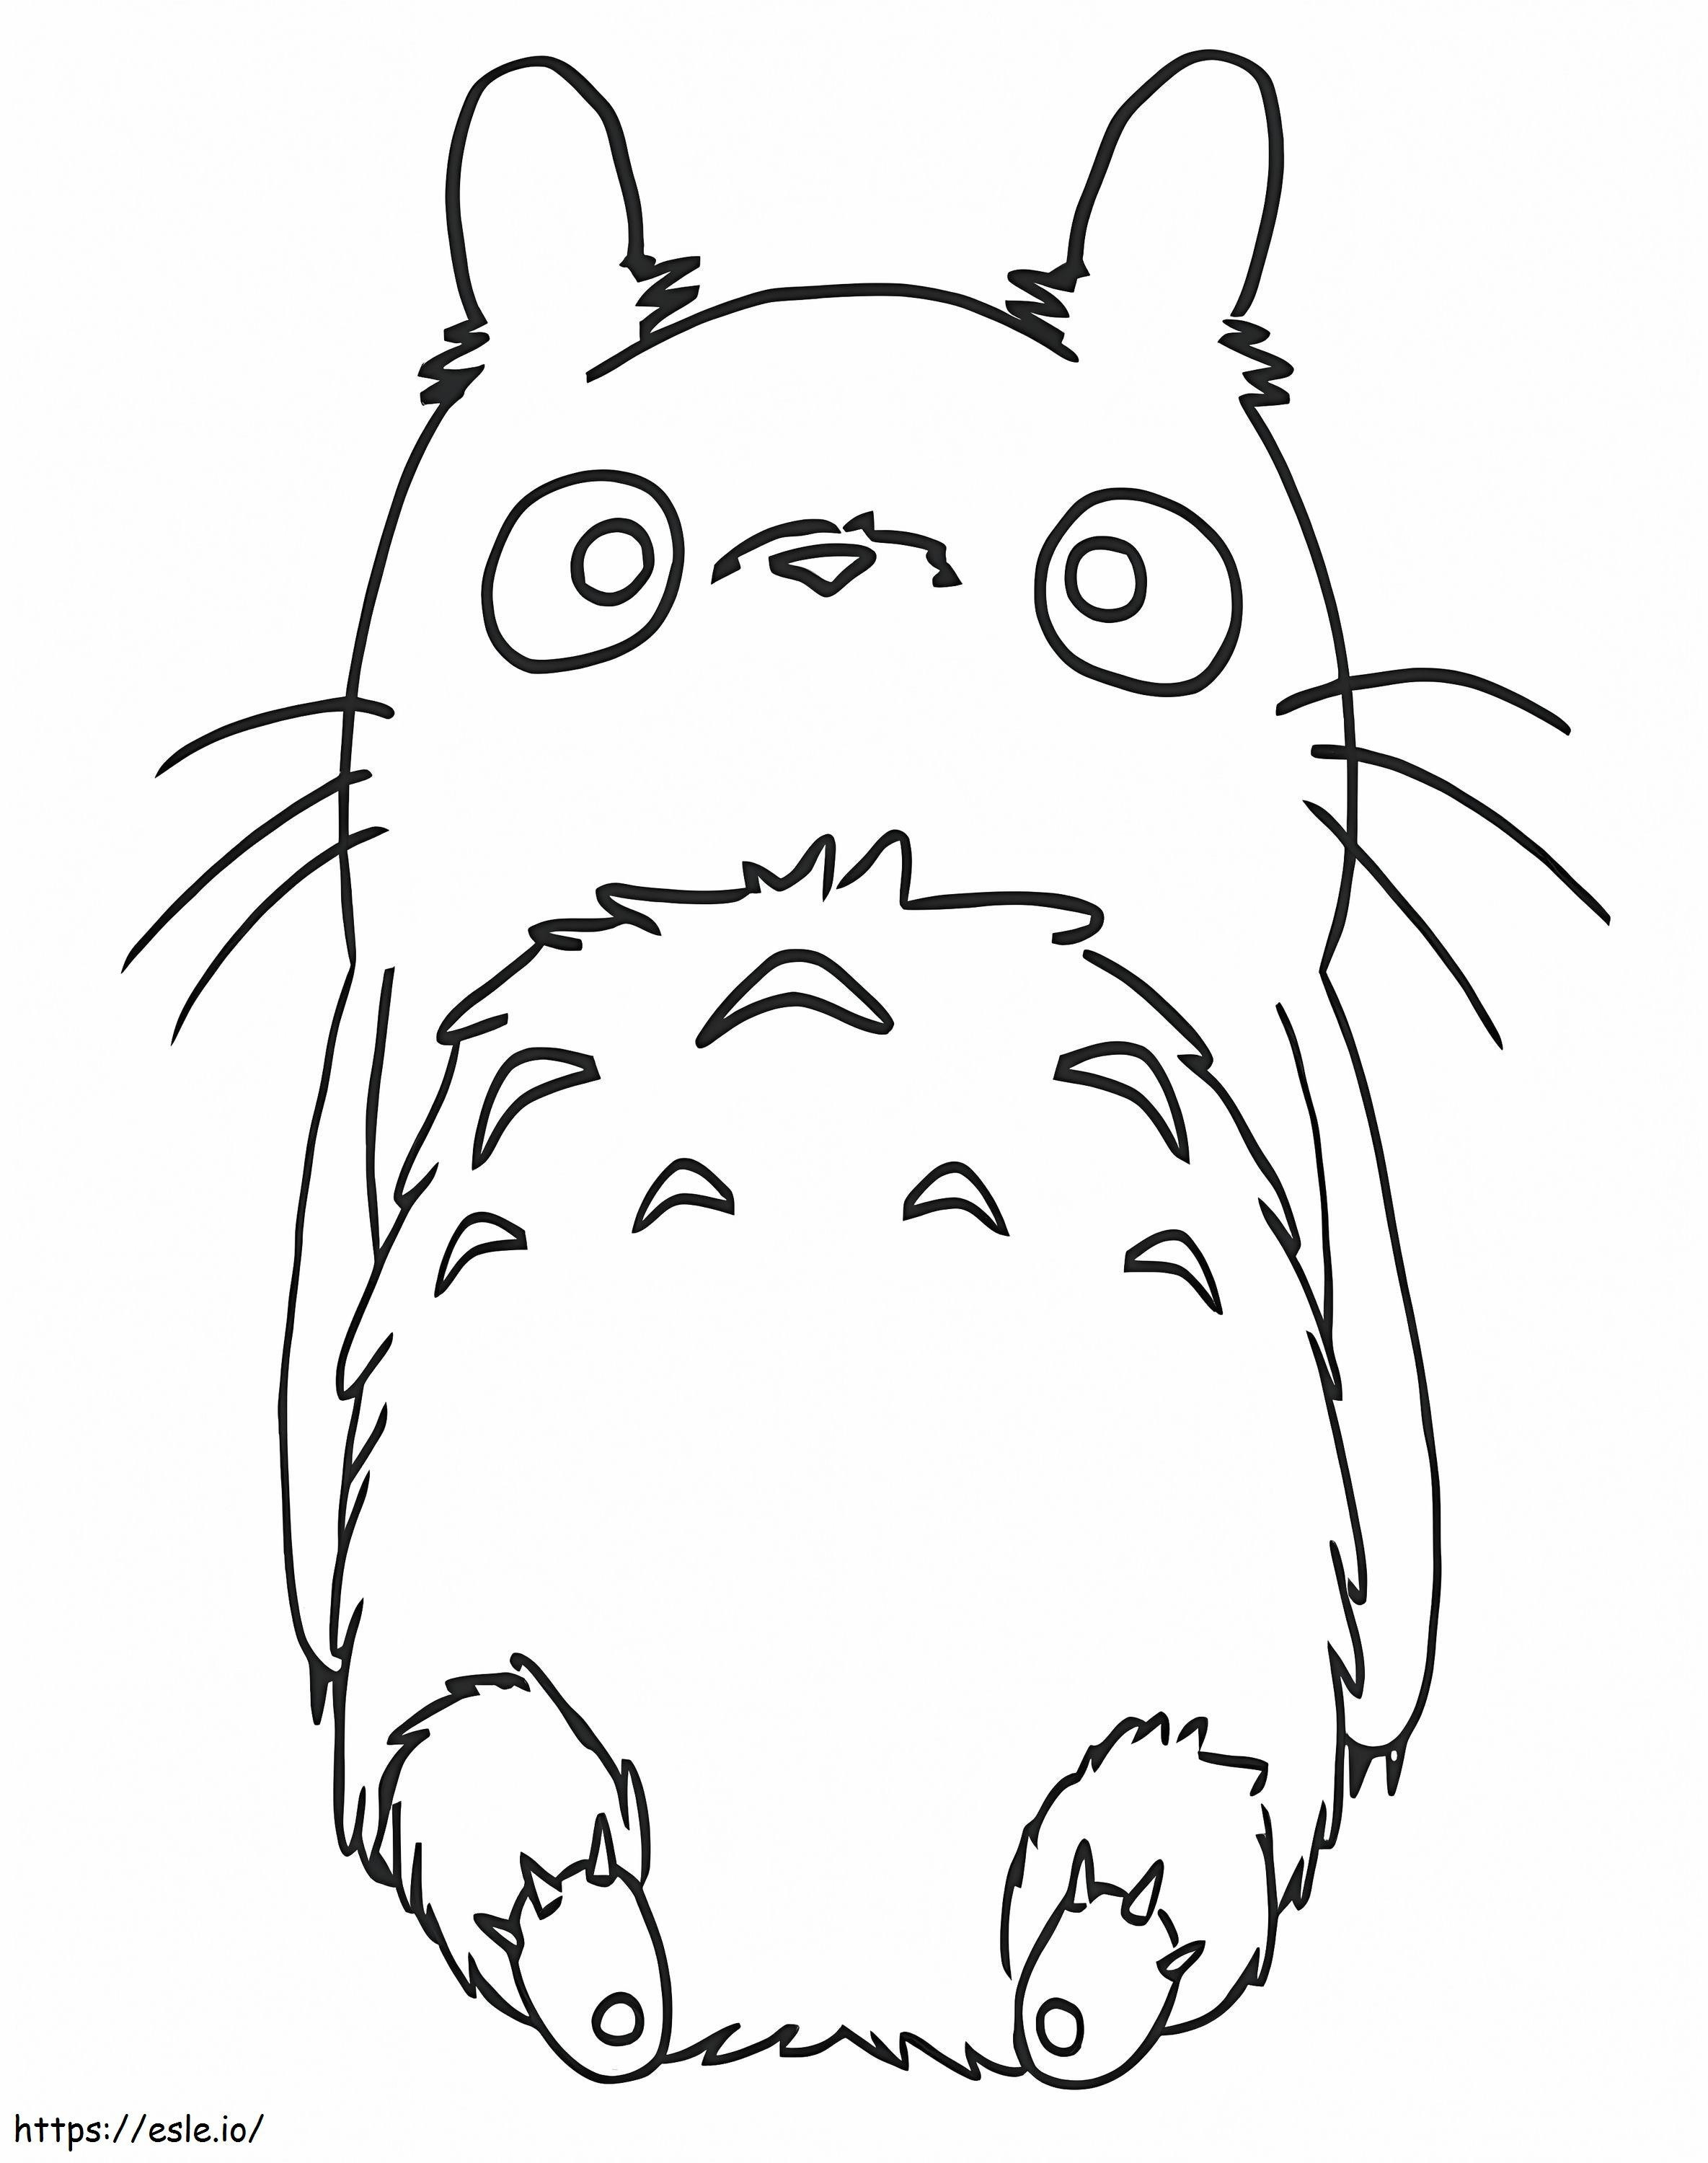 Cute Totoro Lying Down coloring page